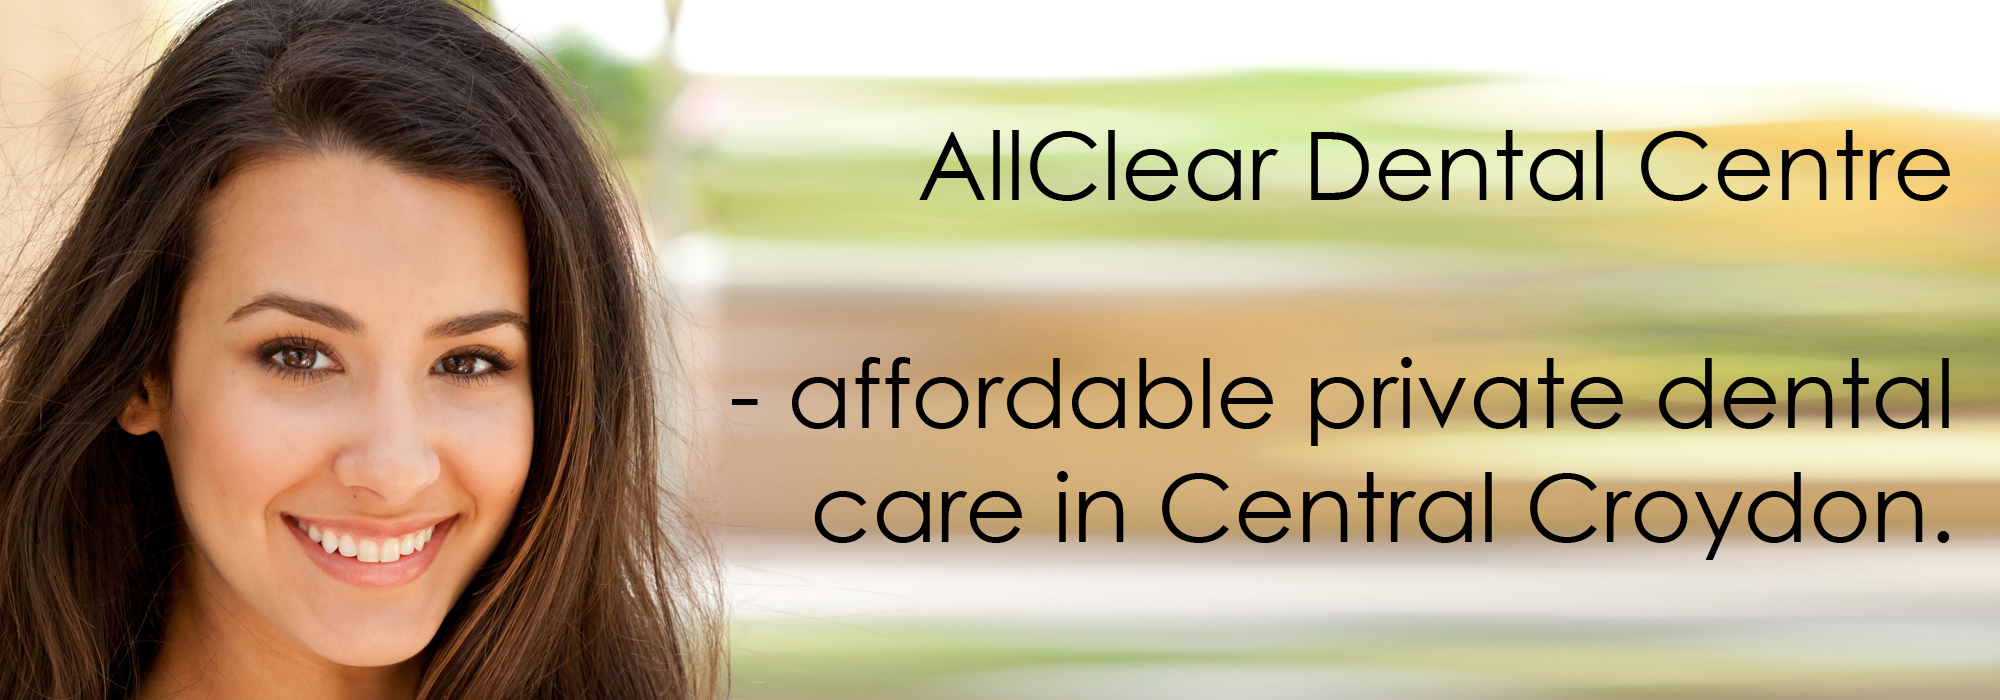 Photo of beautiful smiling woman with the caption AllClear Dental Centre, affordable private dental care in central Croydon